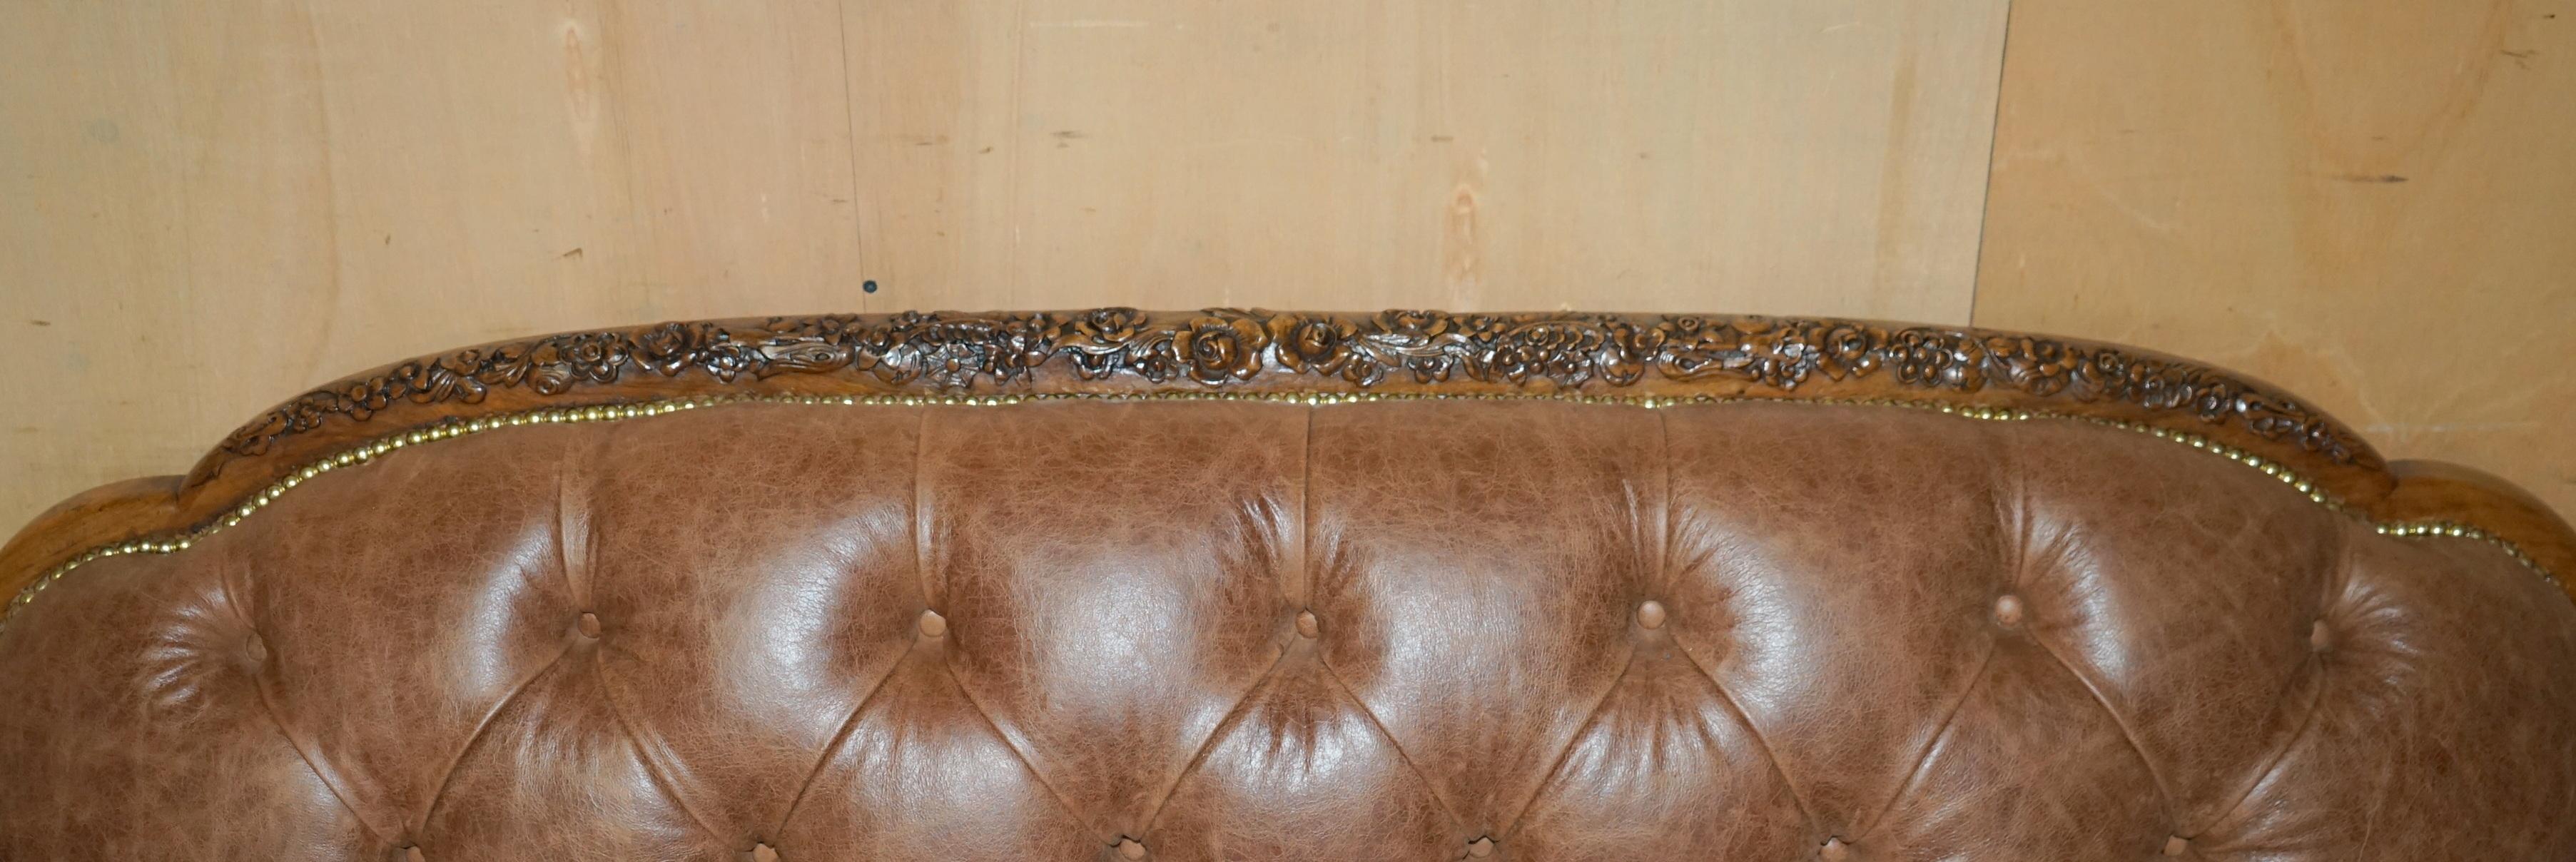 Early 19th Century ANTIQUE FULLY RESTORED REGENCY 1810 CHESTERFiELD SOFA BROWN LEATHER CARVED FRAME For Sale